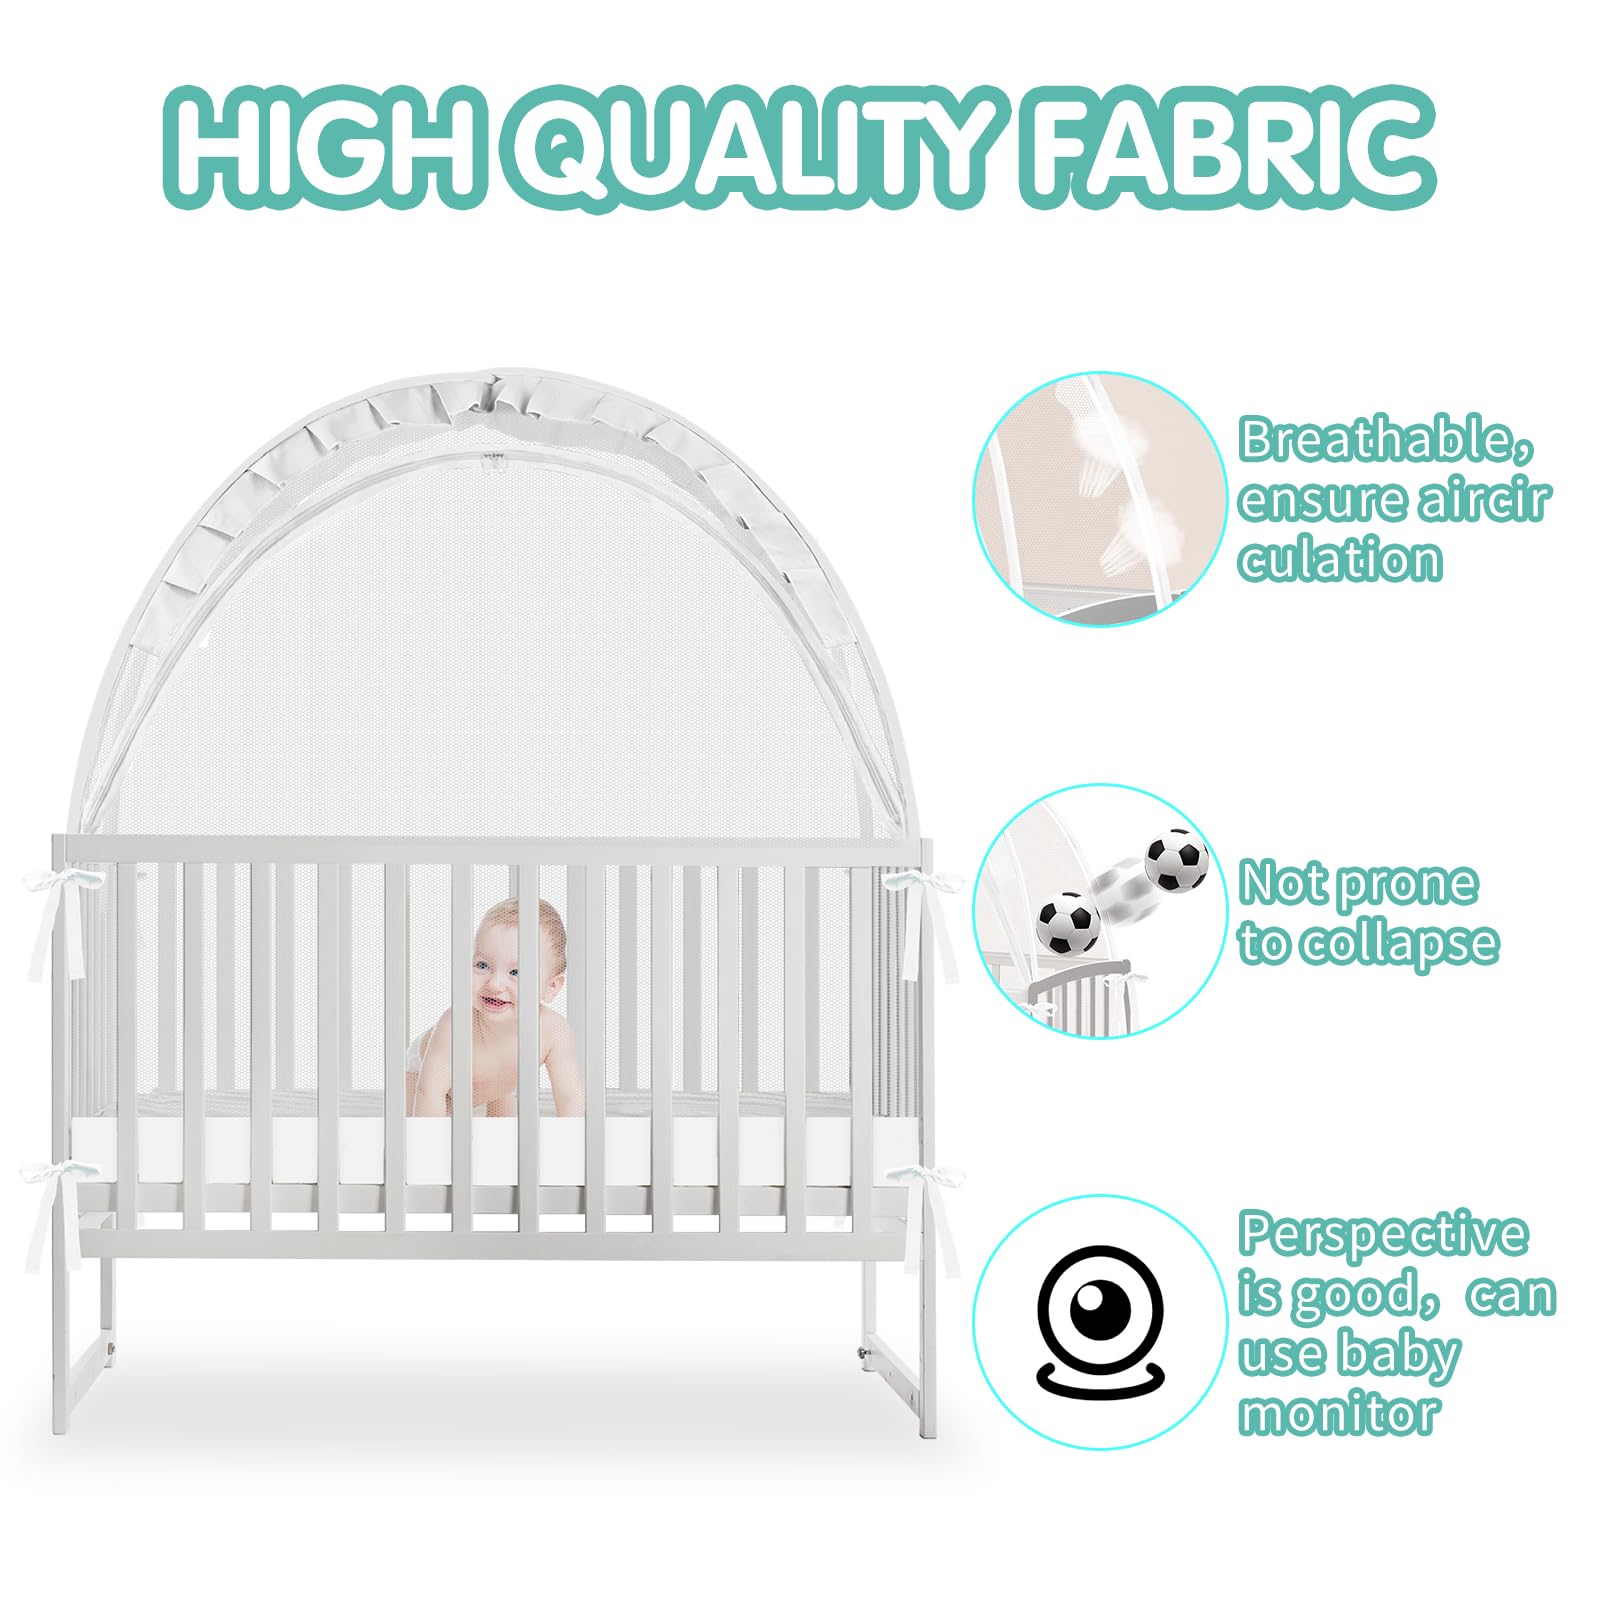 Crib Tent - Crib Net to Keep Baby in, Stop Baby from Climbing Out of Crib, Pop Up Baby Crib Tent with Durable Breathable Net Double Zipper Strong Rods Installation Convenience